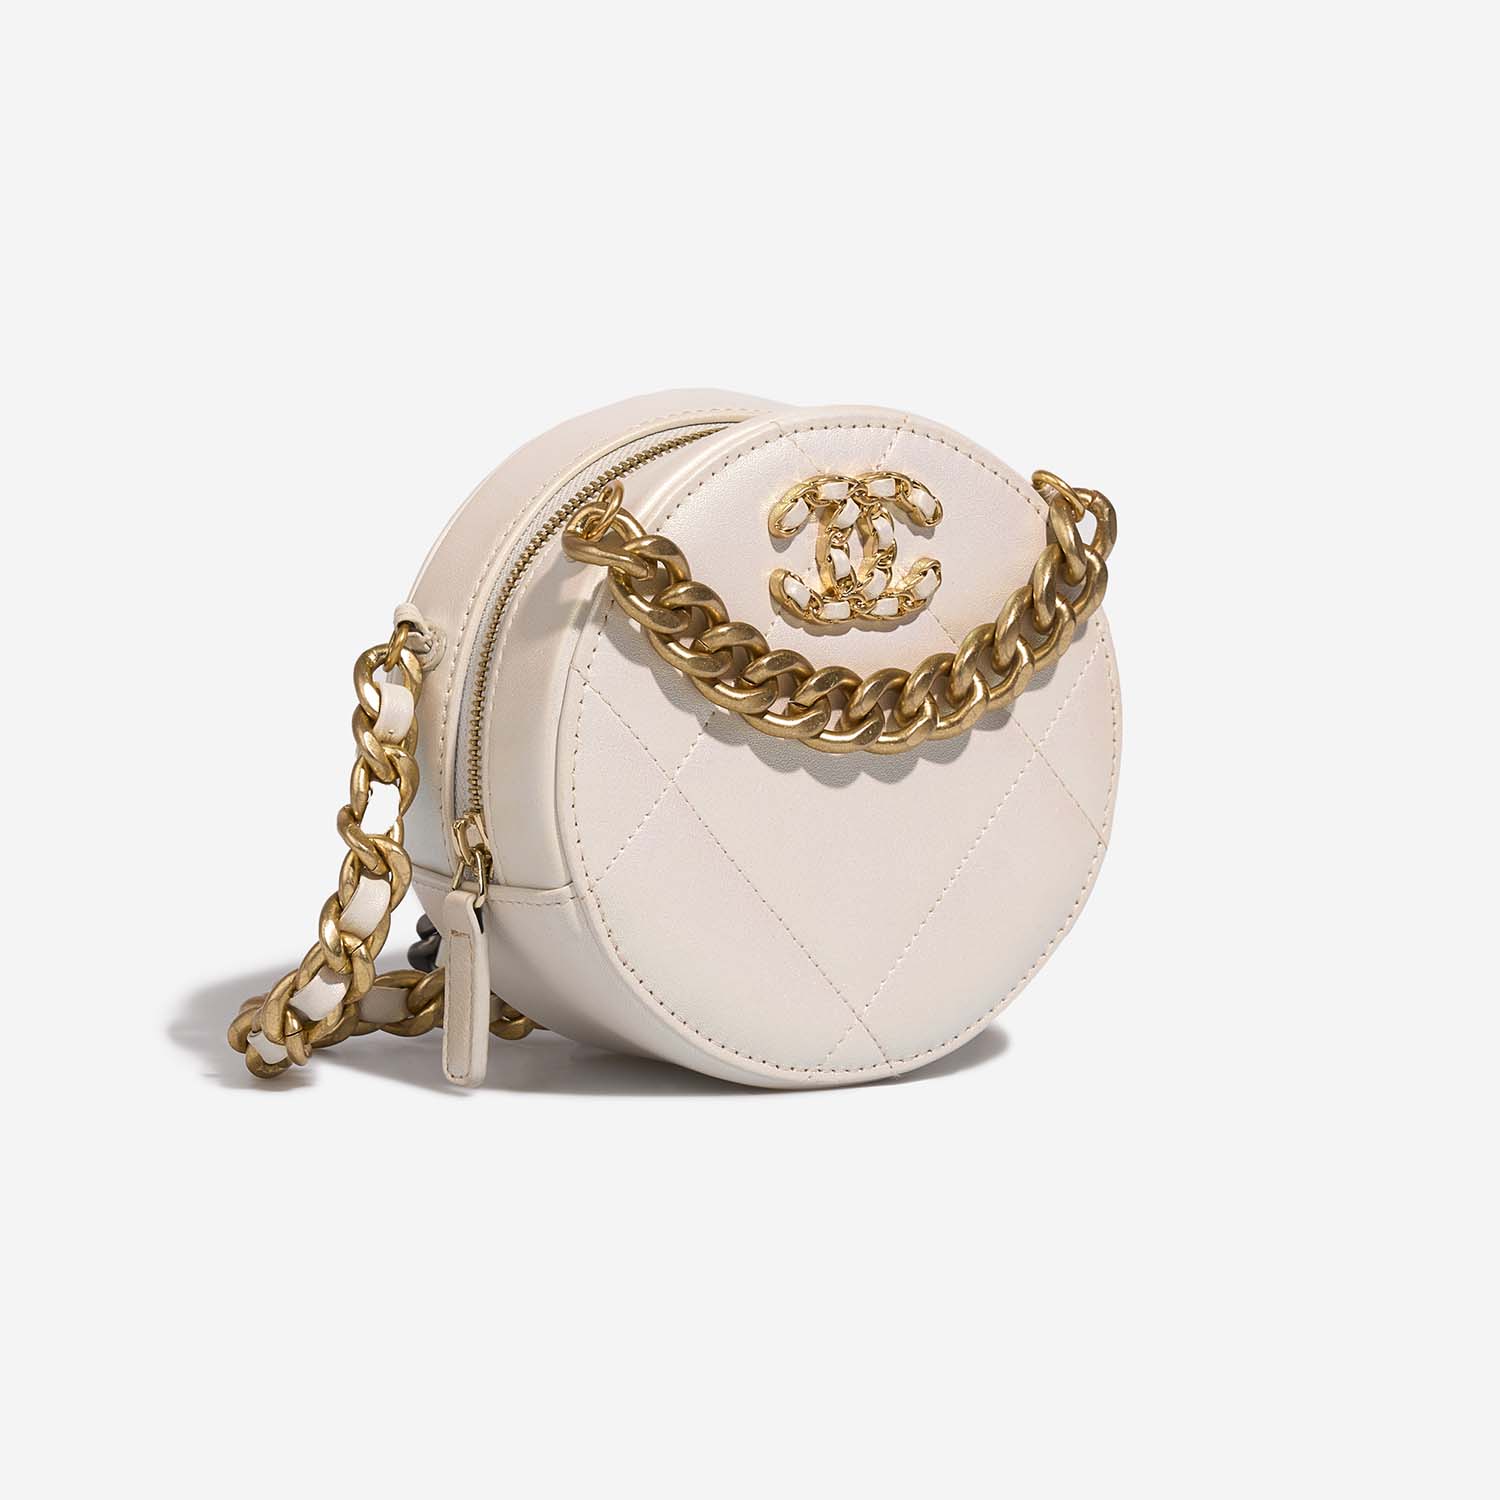 Chanel 19 RoundClutch PearlWhite Side Front  | Sell your designer bag on Saclab.com